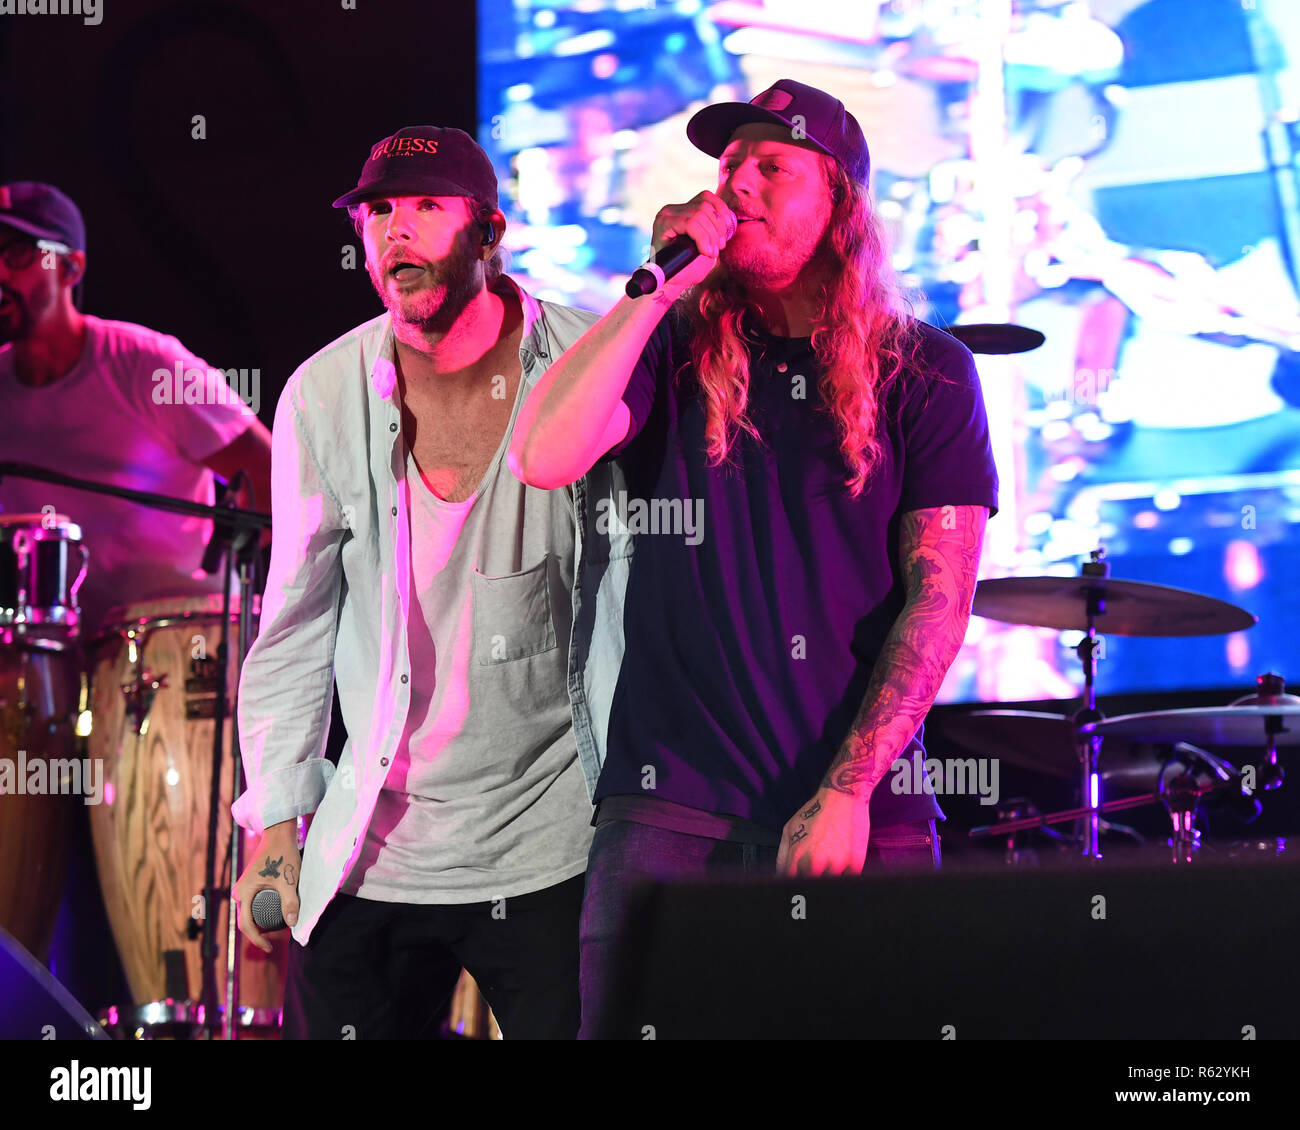 https://c8.alamy.com/comp/R62YKH/fort-lauderdale-fl-december-01-jared-dirty-j-watson-and-dustin-duddy-b-bushnell-of-dirty-heads-perform-during-the-riptide-music-festival-at-fort-lauderdale-beach-on-december-1-2018-in-fort-lauderdale-floridacredit-mpi04mediapunch-R62YKH.jpg